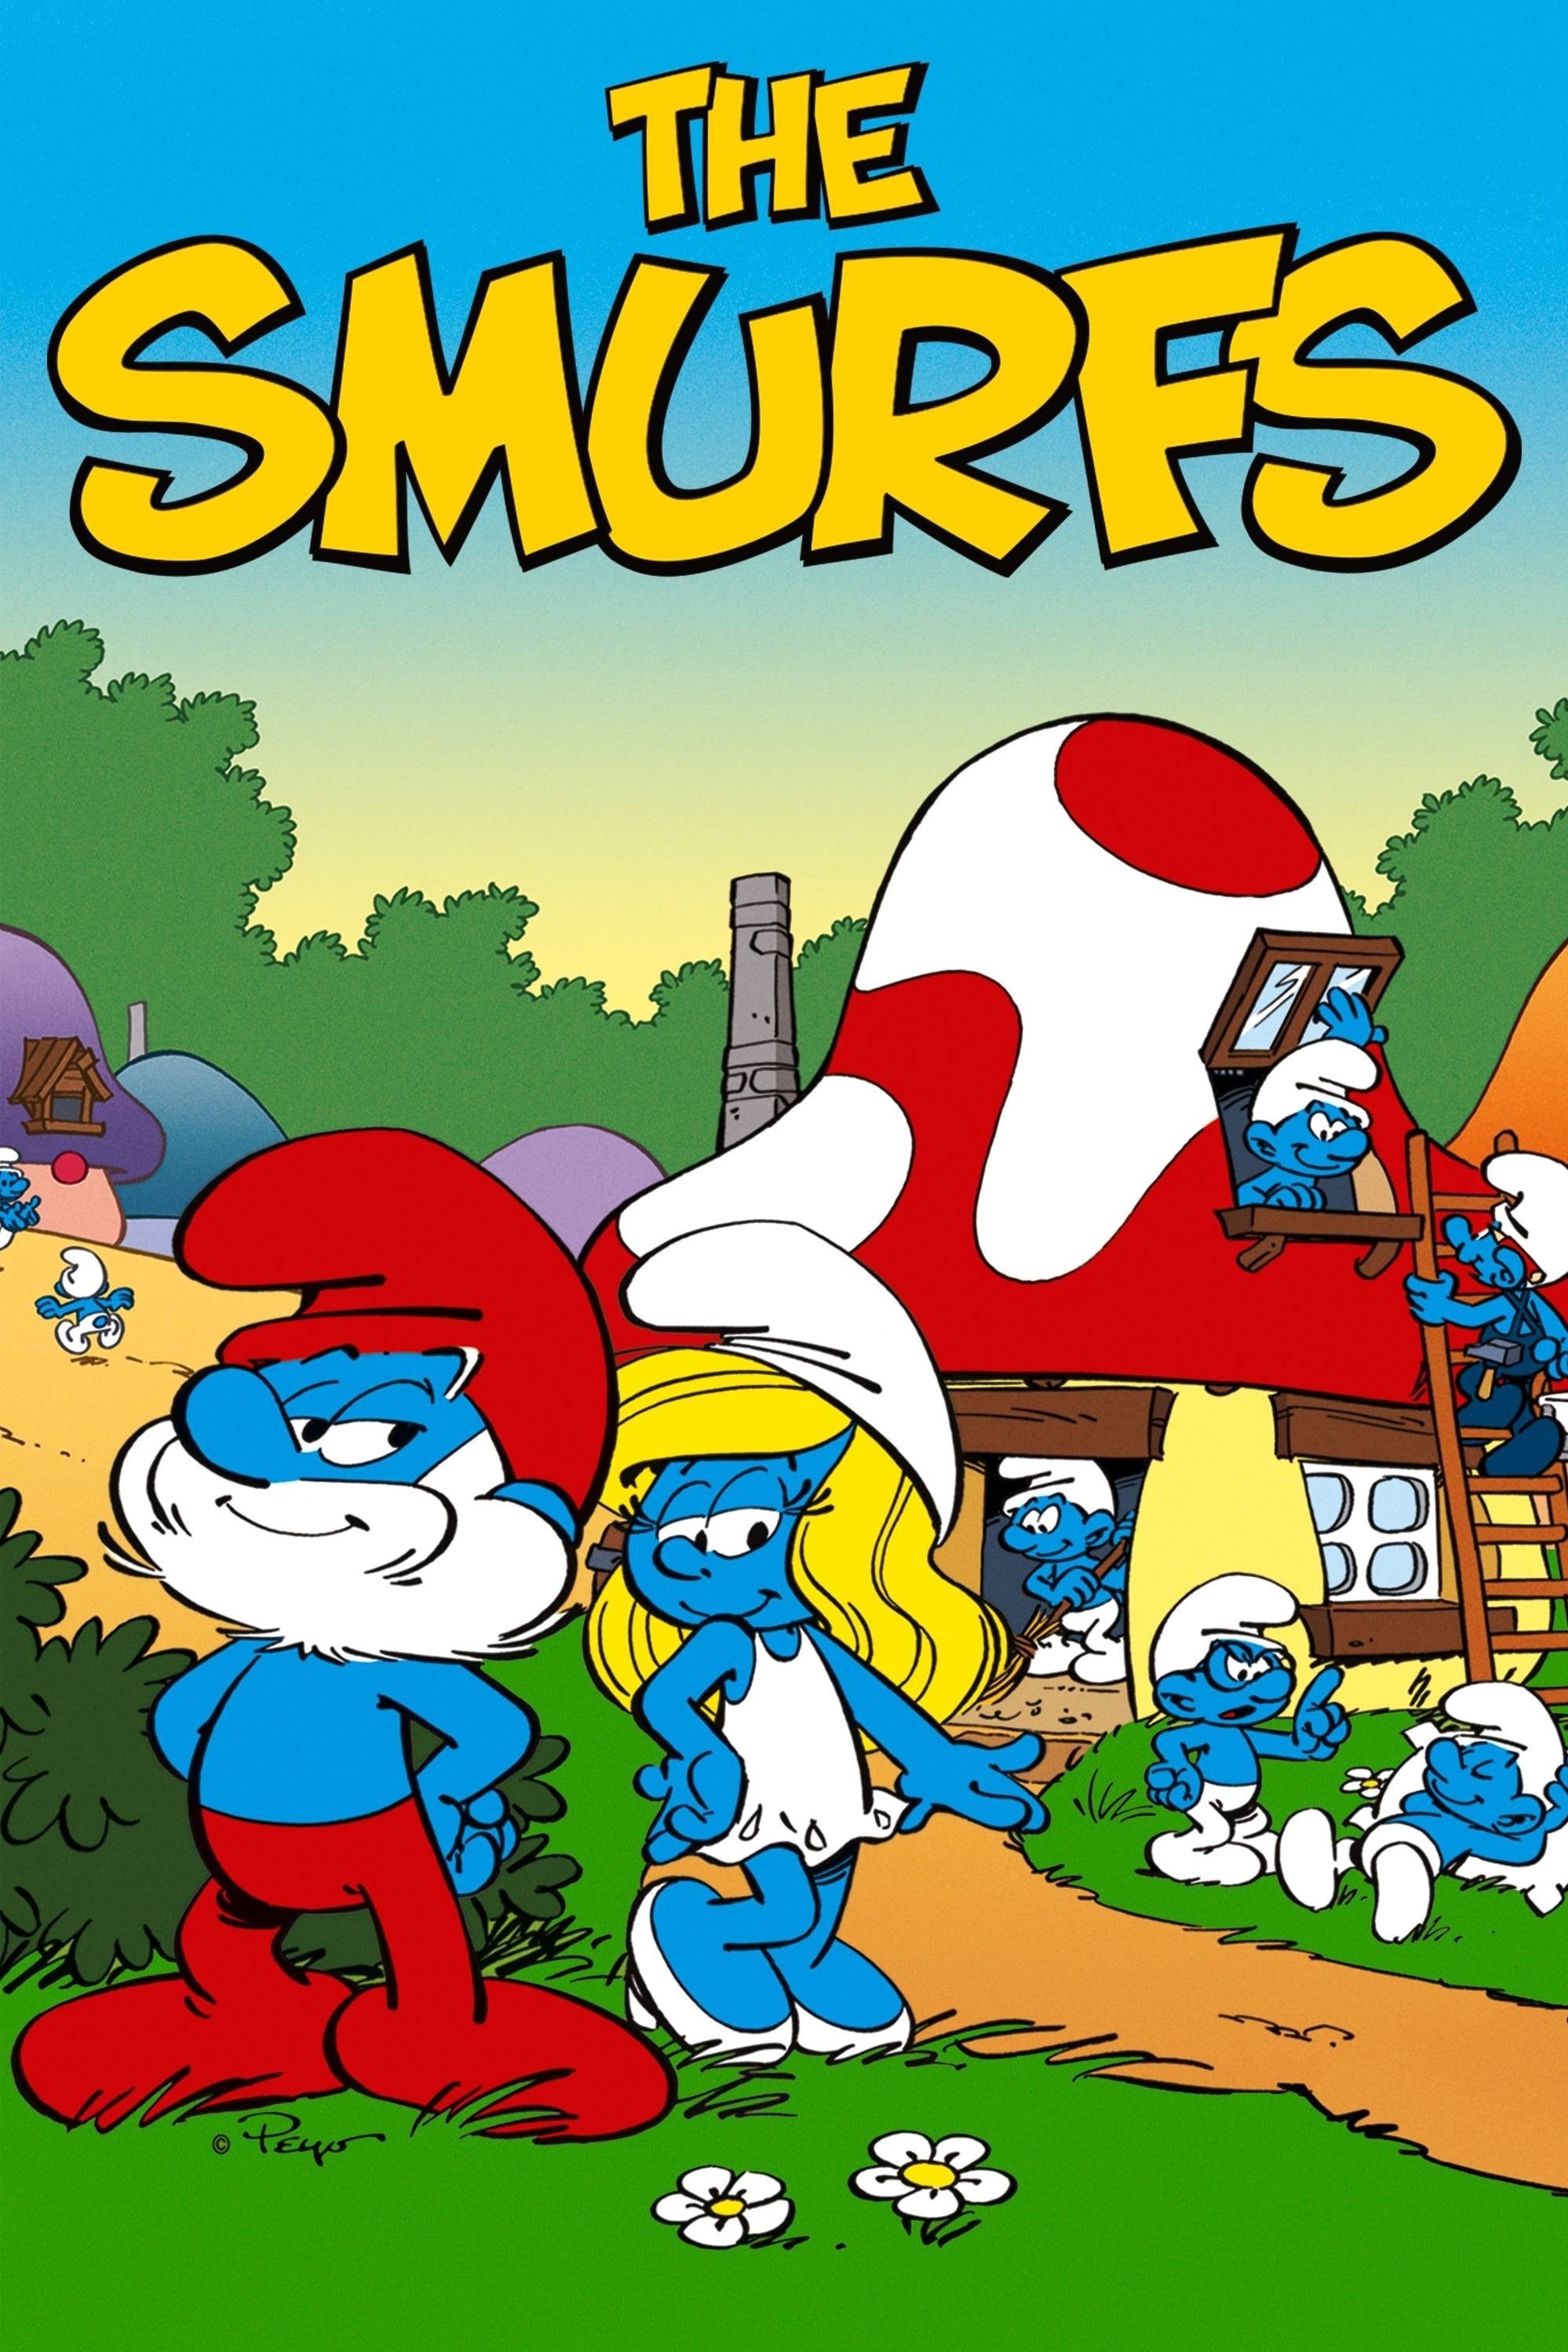 The Smurfs - Where to Watch and Stream - TV Guide